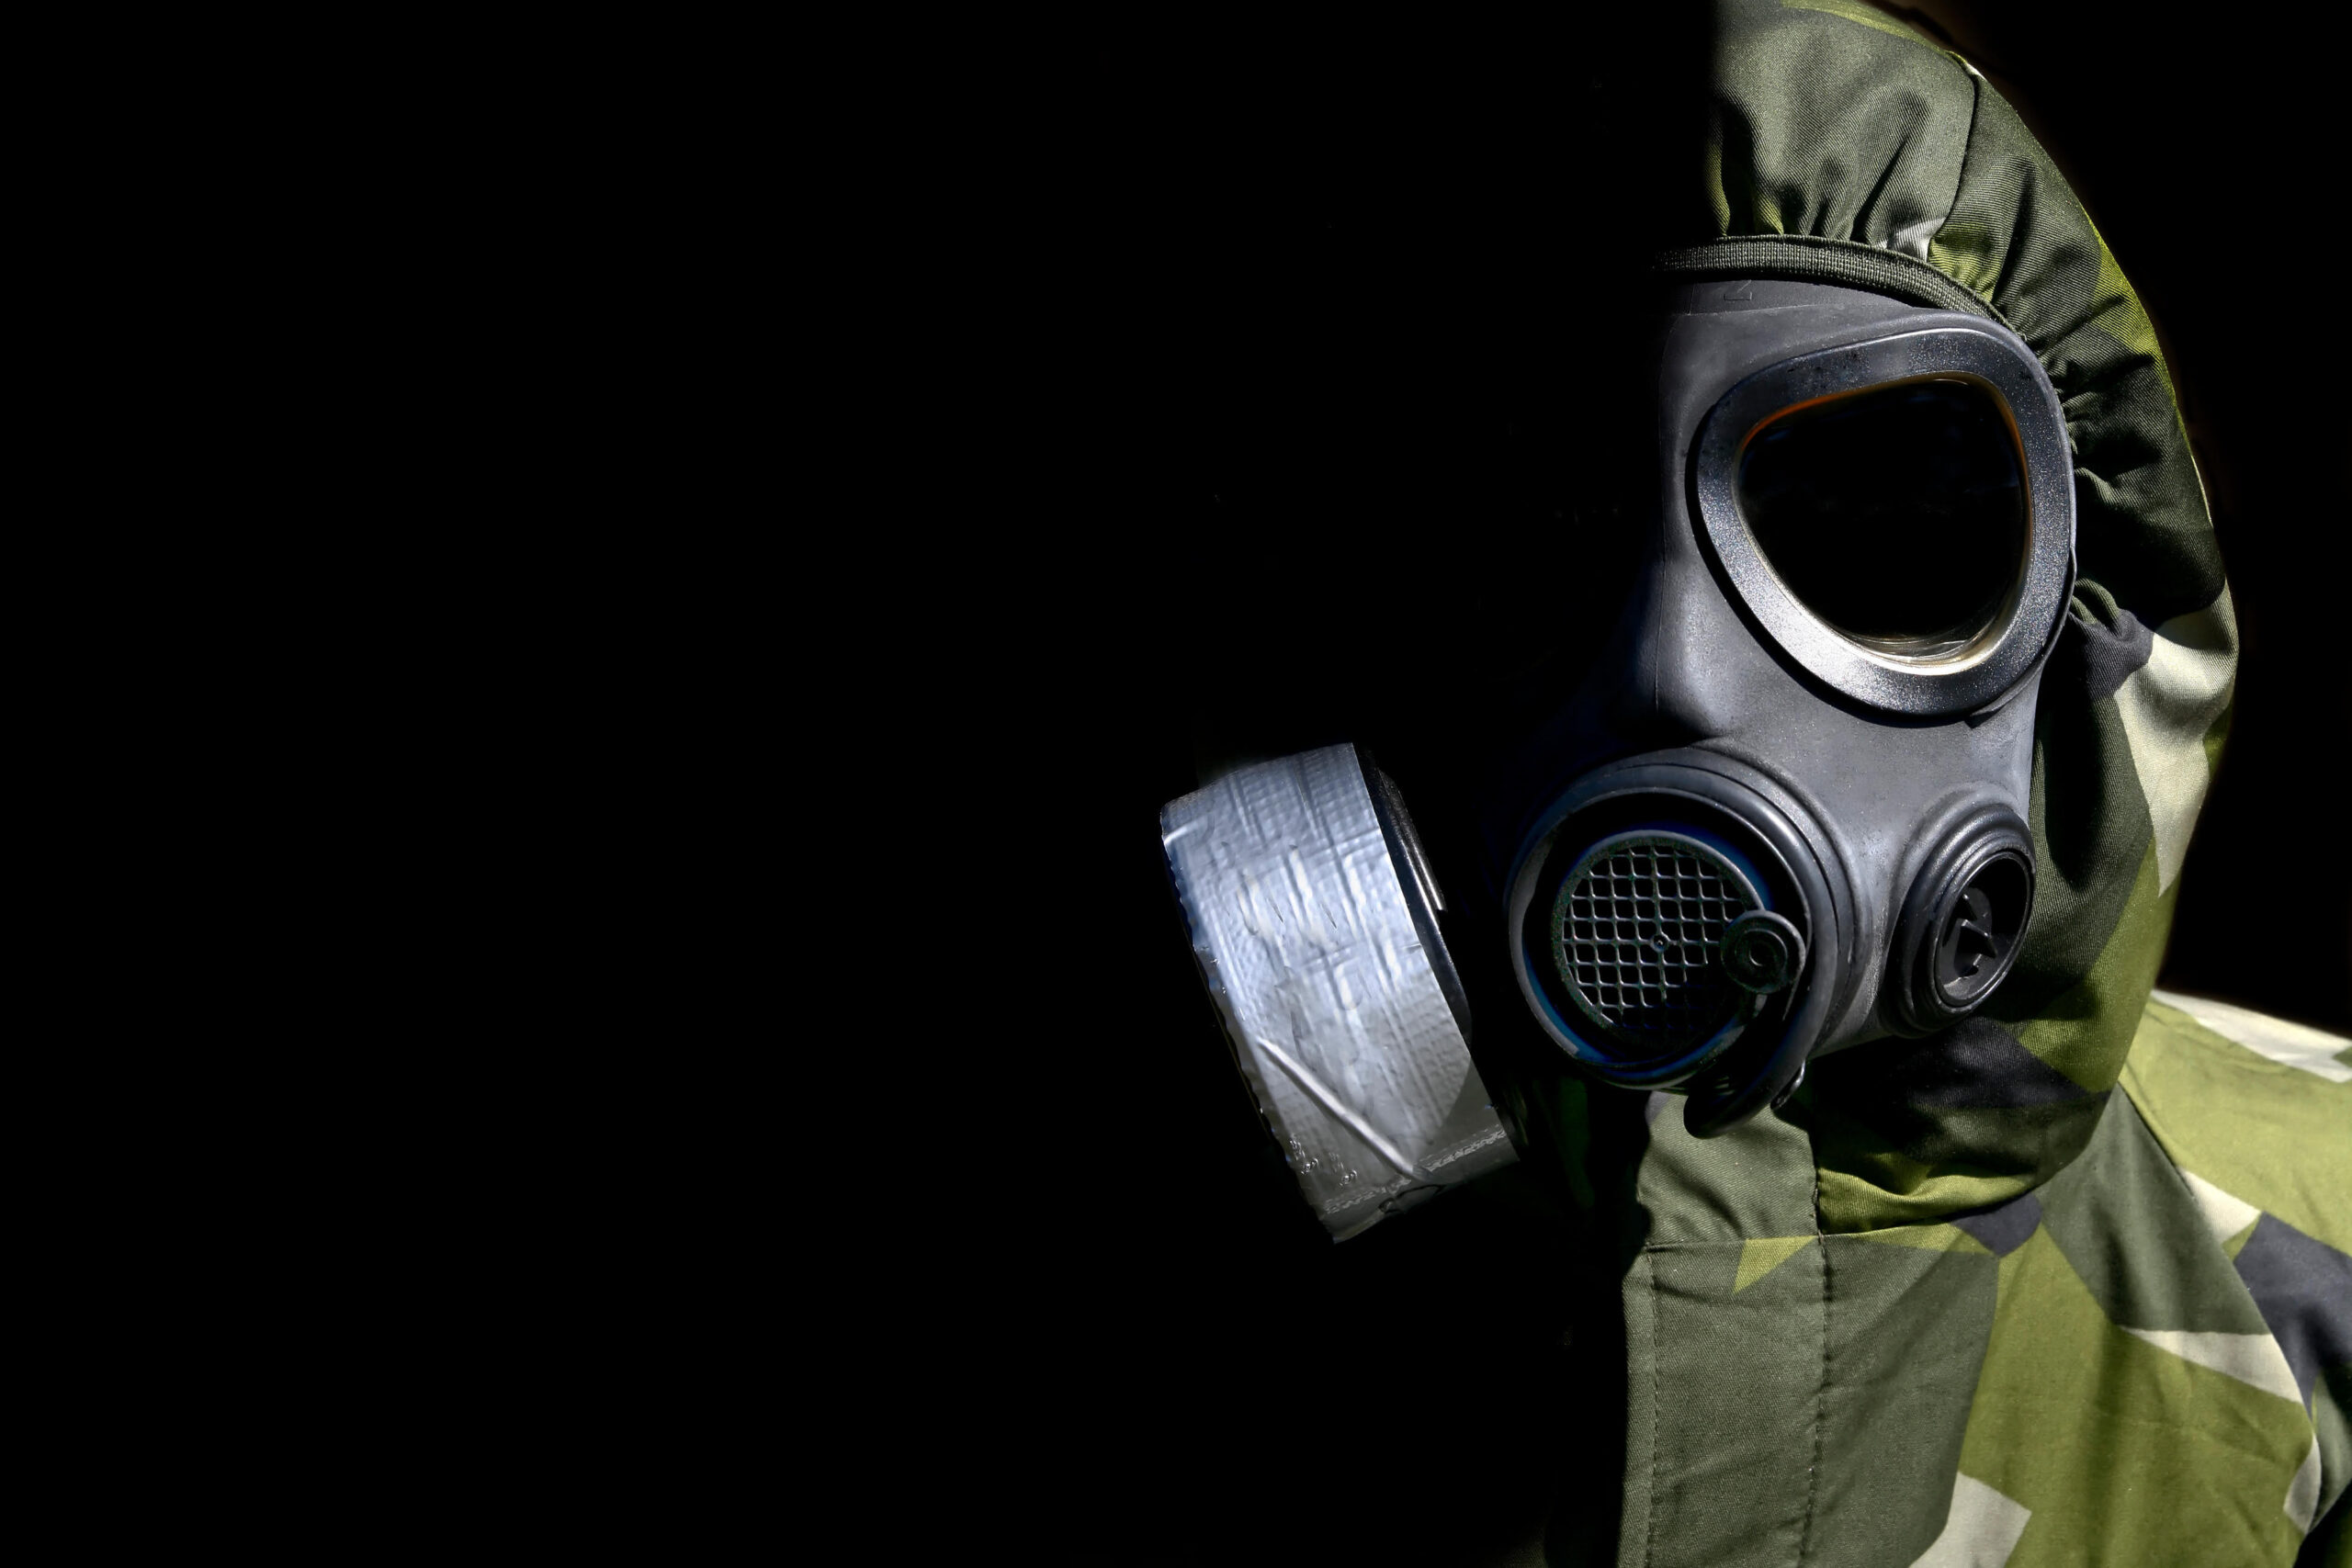 Military person wearing a gasmask and protective clothing.